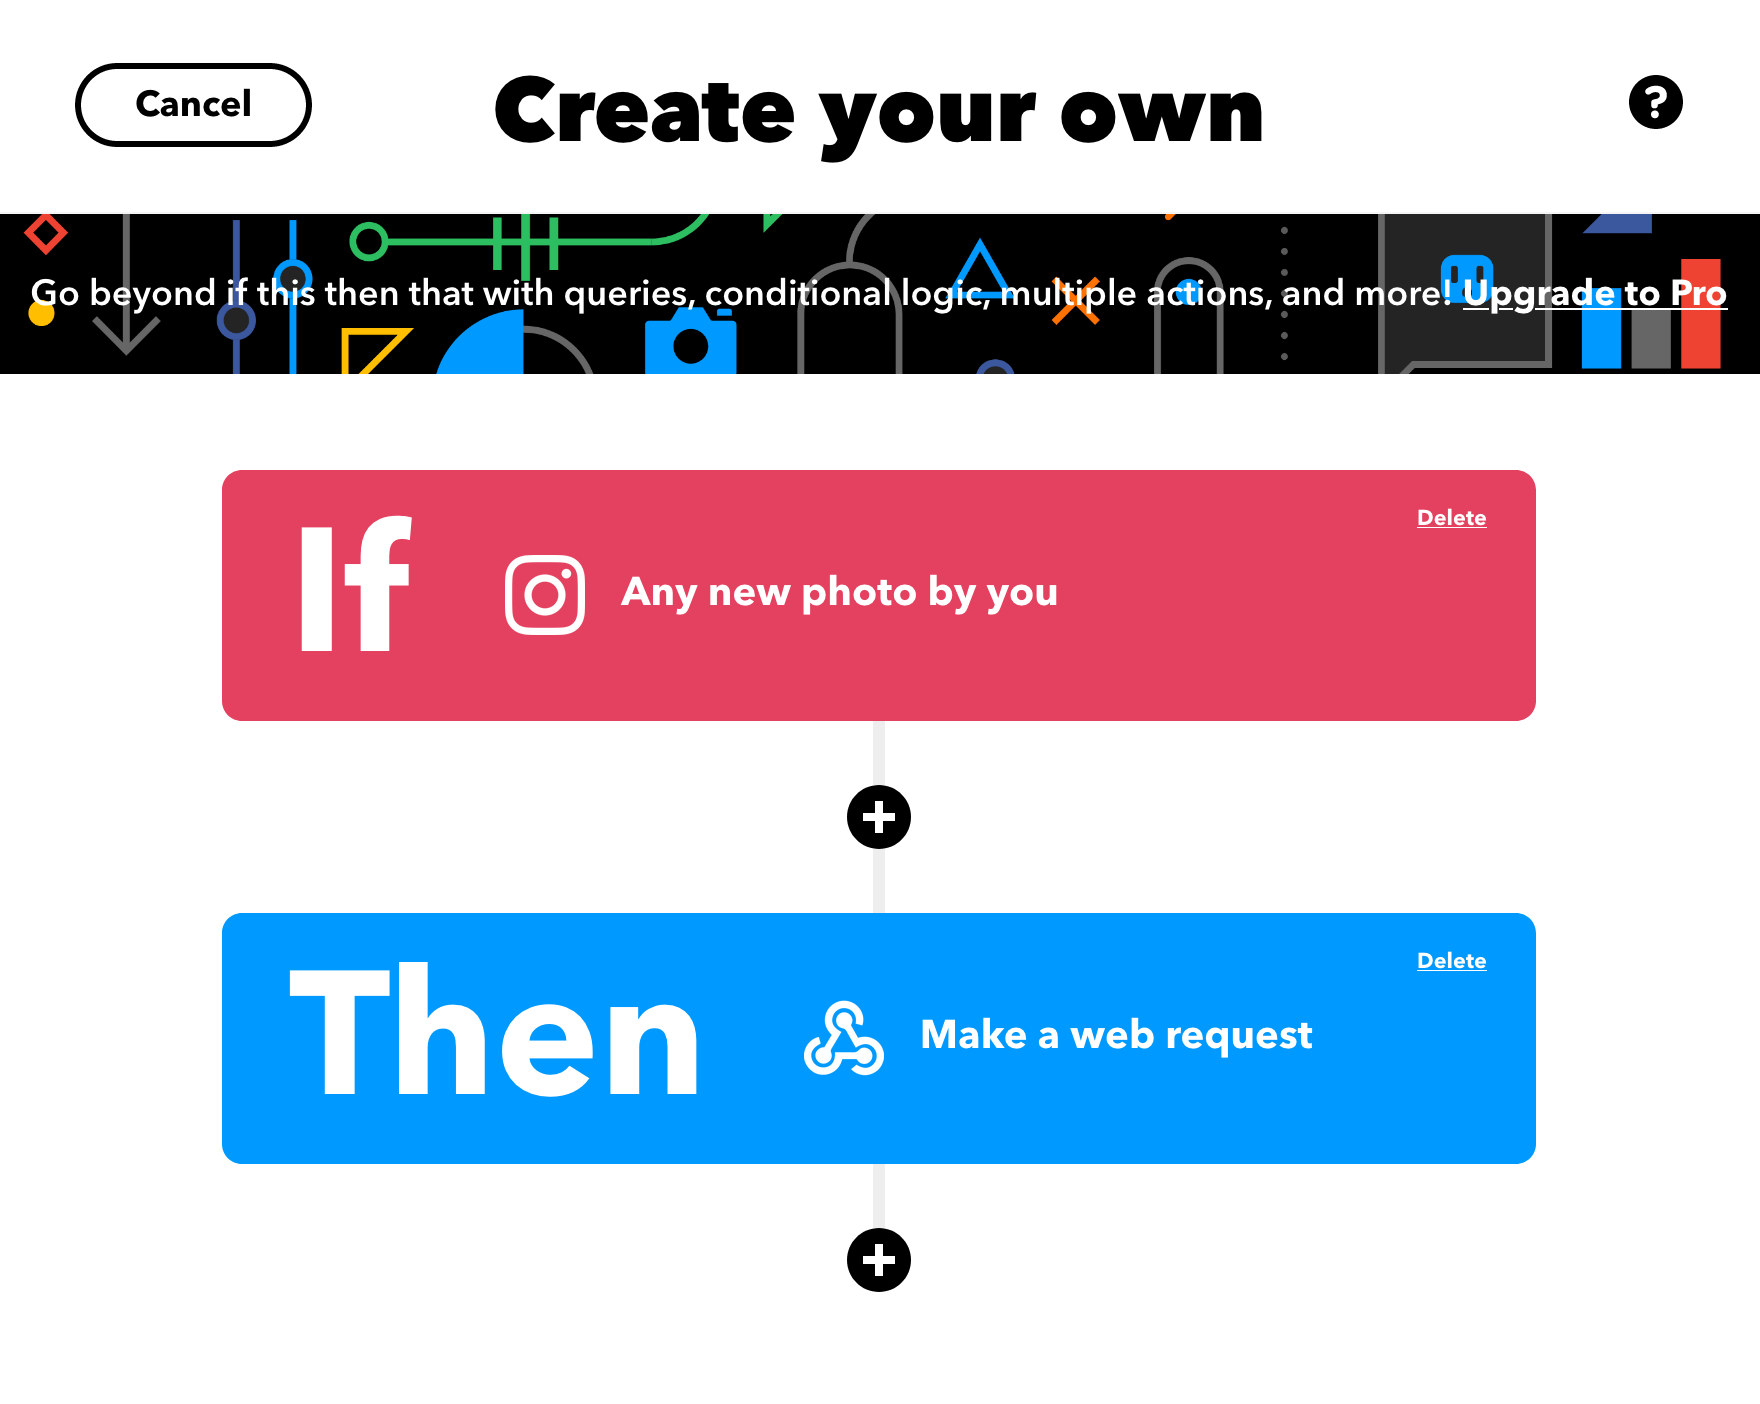 Partial screenshot from IFTTT's applet creation result showing completed Instagram and Web Request steps